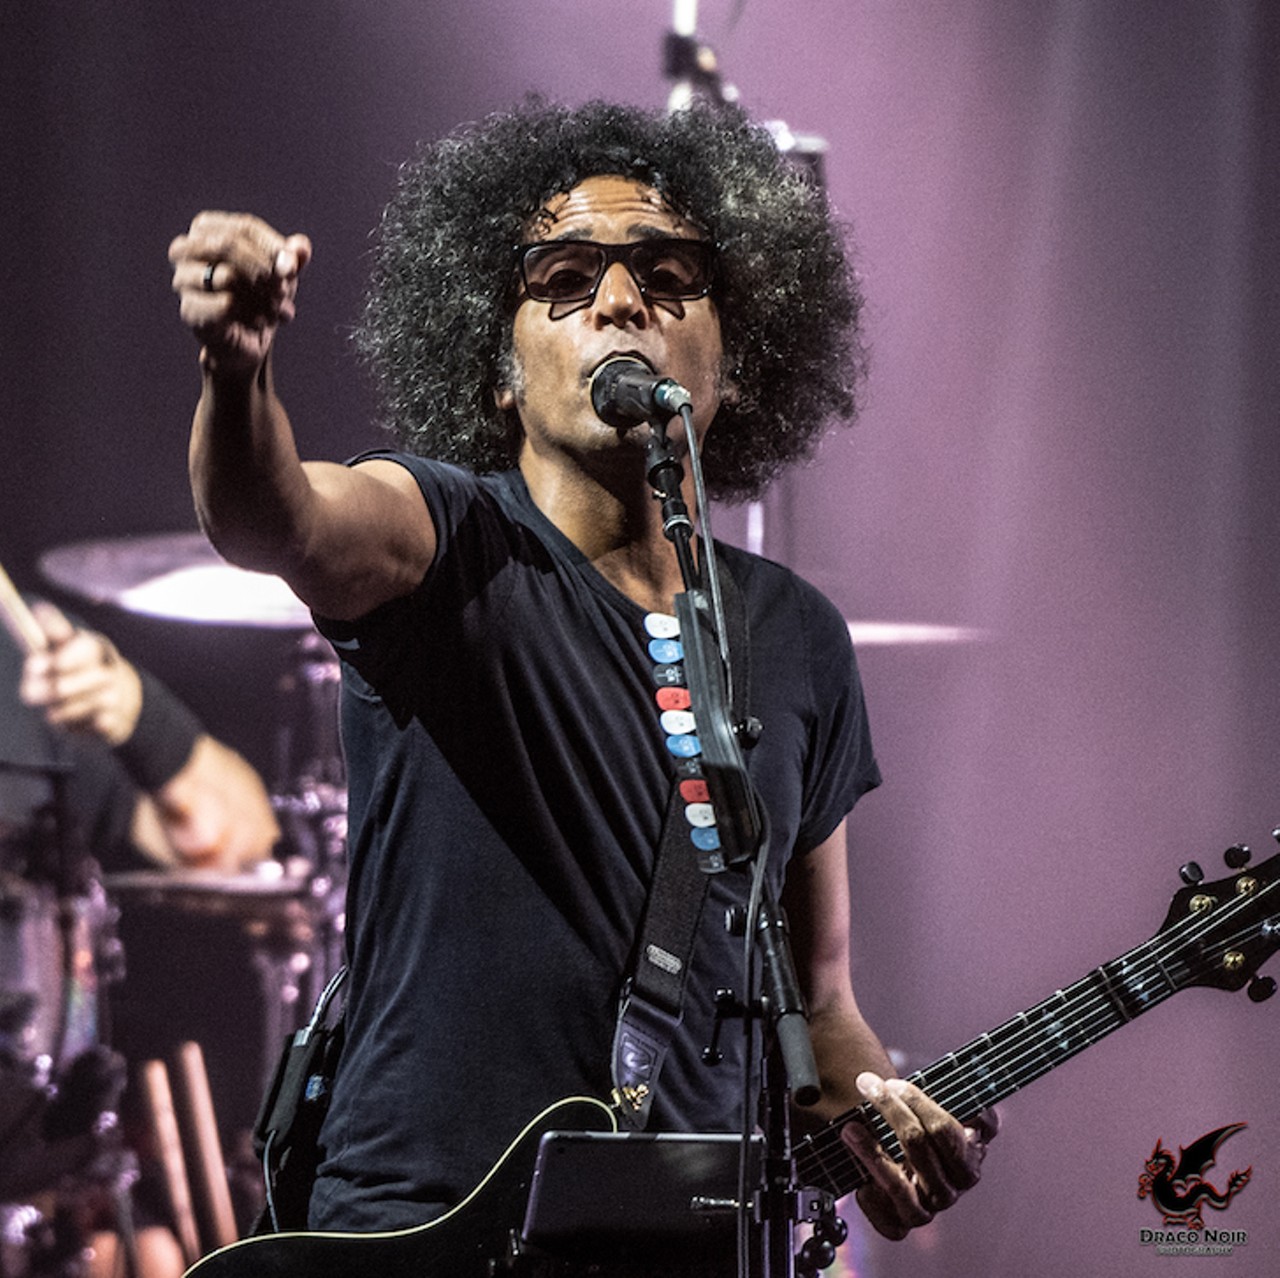 Photos from the sold-out Alice in Chains show at Hard Rock Live in Orlando